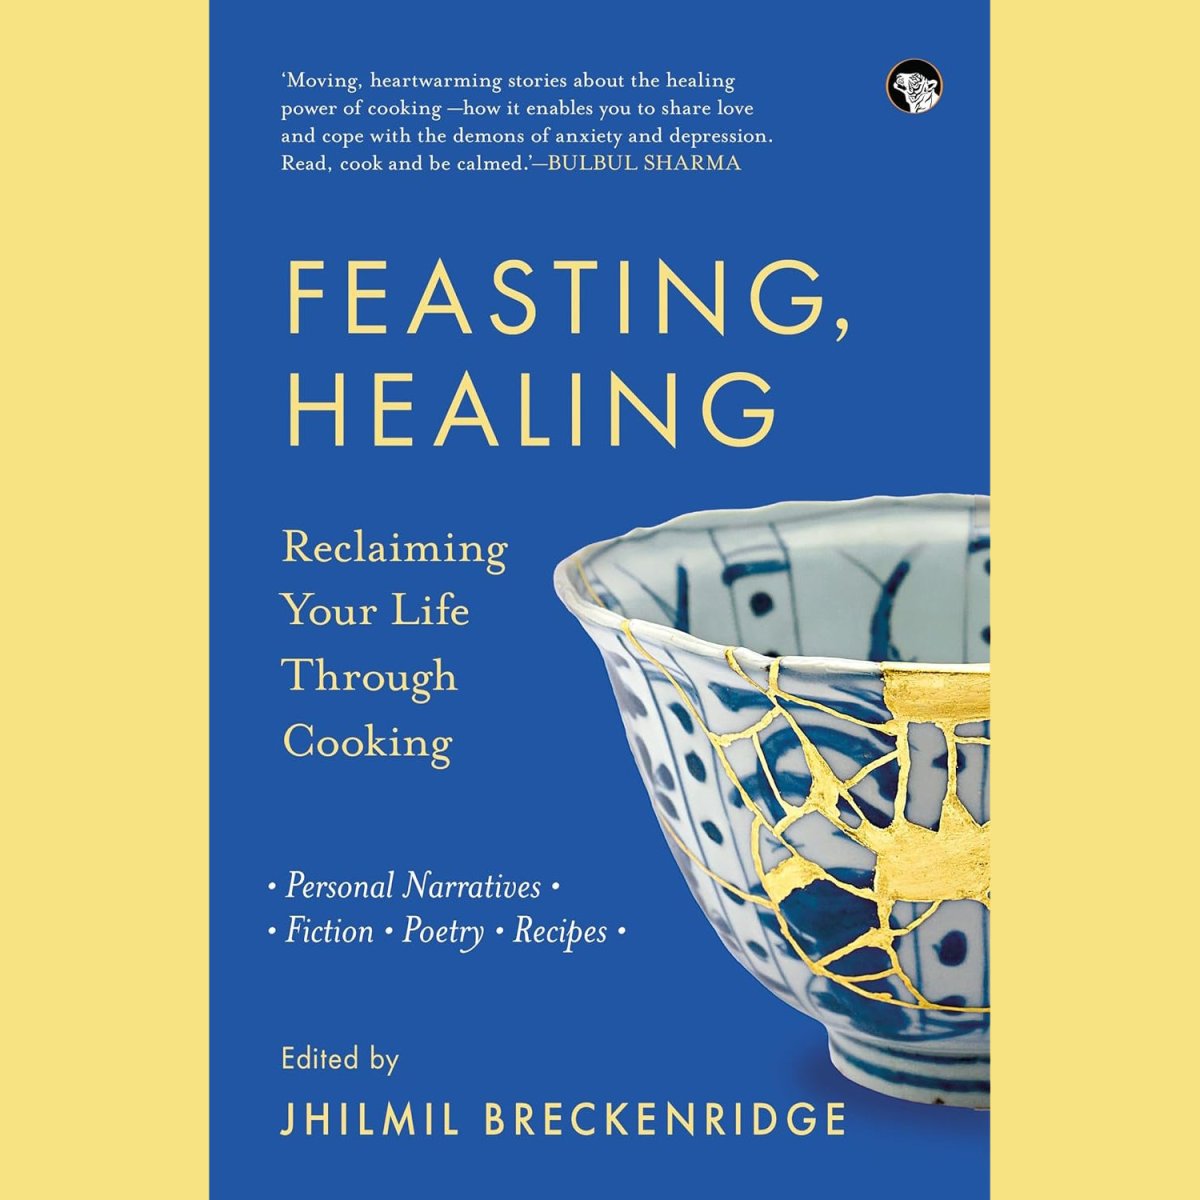 Book Review: Feasting, Healing – Reclaiming Your Life Through Cooking